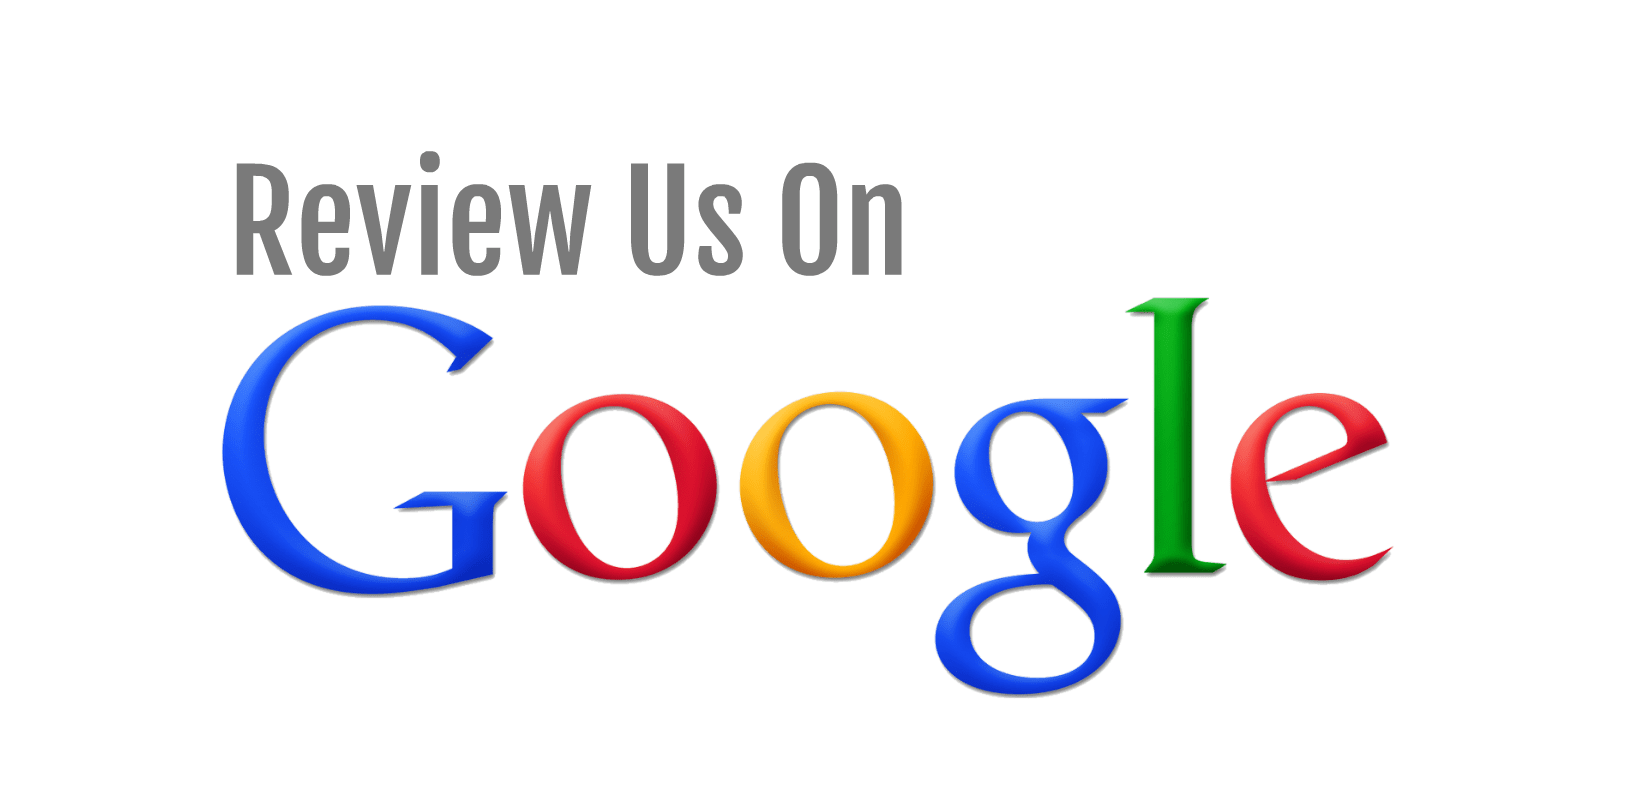 Google review logo| Port Richey, FL | Clean As A Whistle Cleaning Services